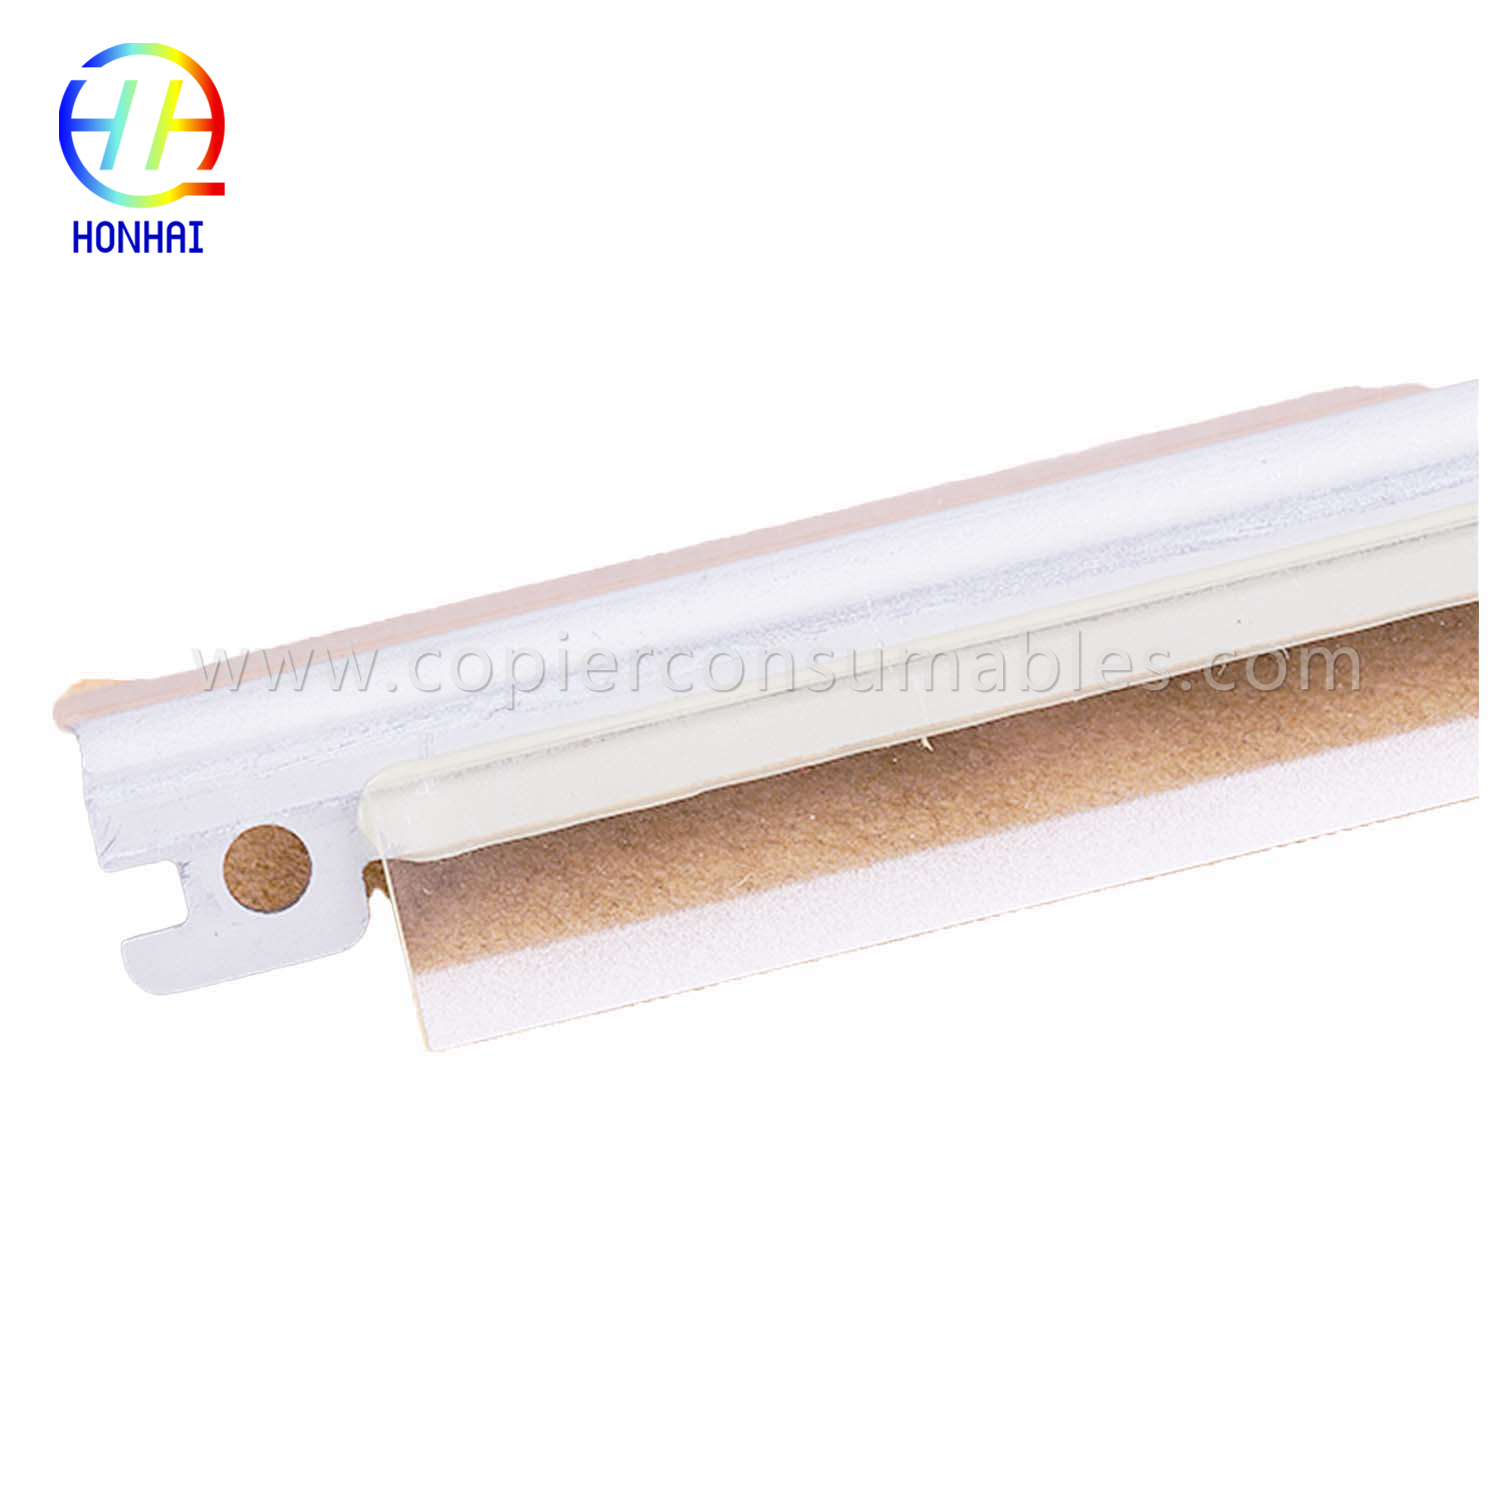 Drum Cleaning Blade for Xerox 4110 4112 4127 4590 4595 (033K96310) (3) 拷贝